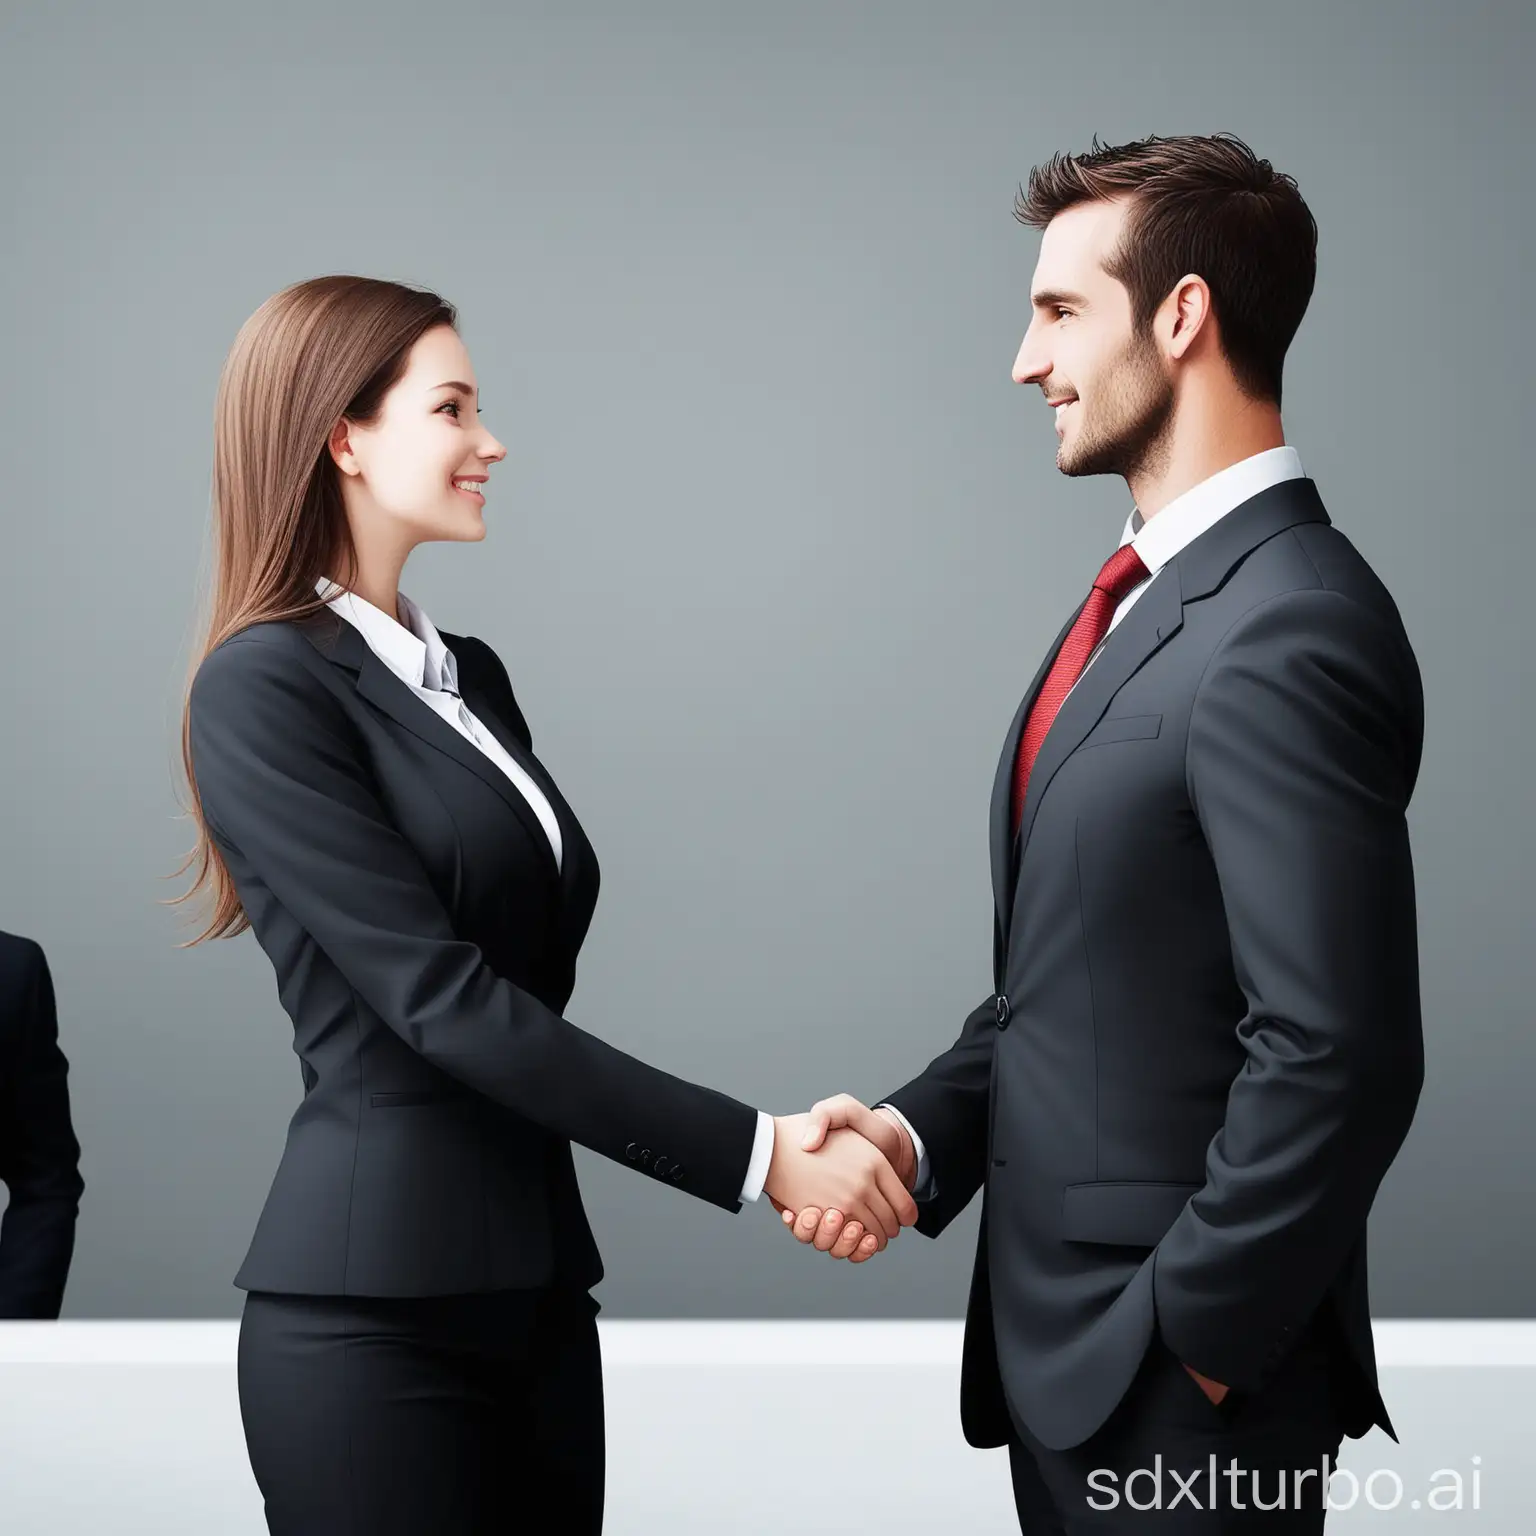 man and women shaking hands they are on professional suits give whole pic